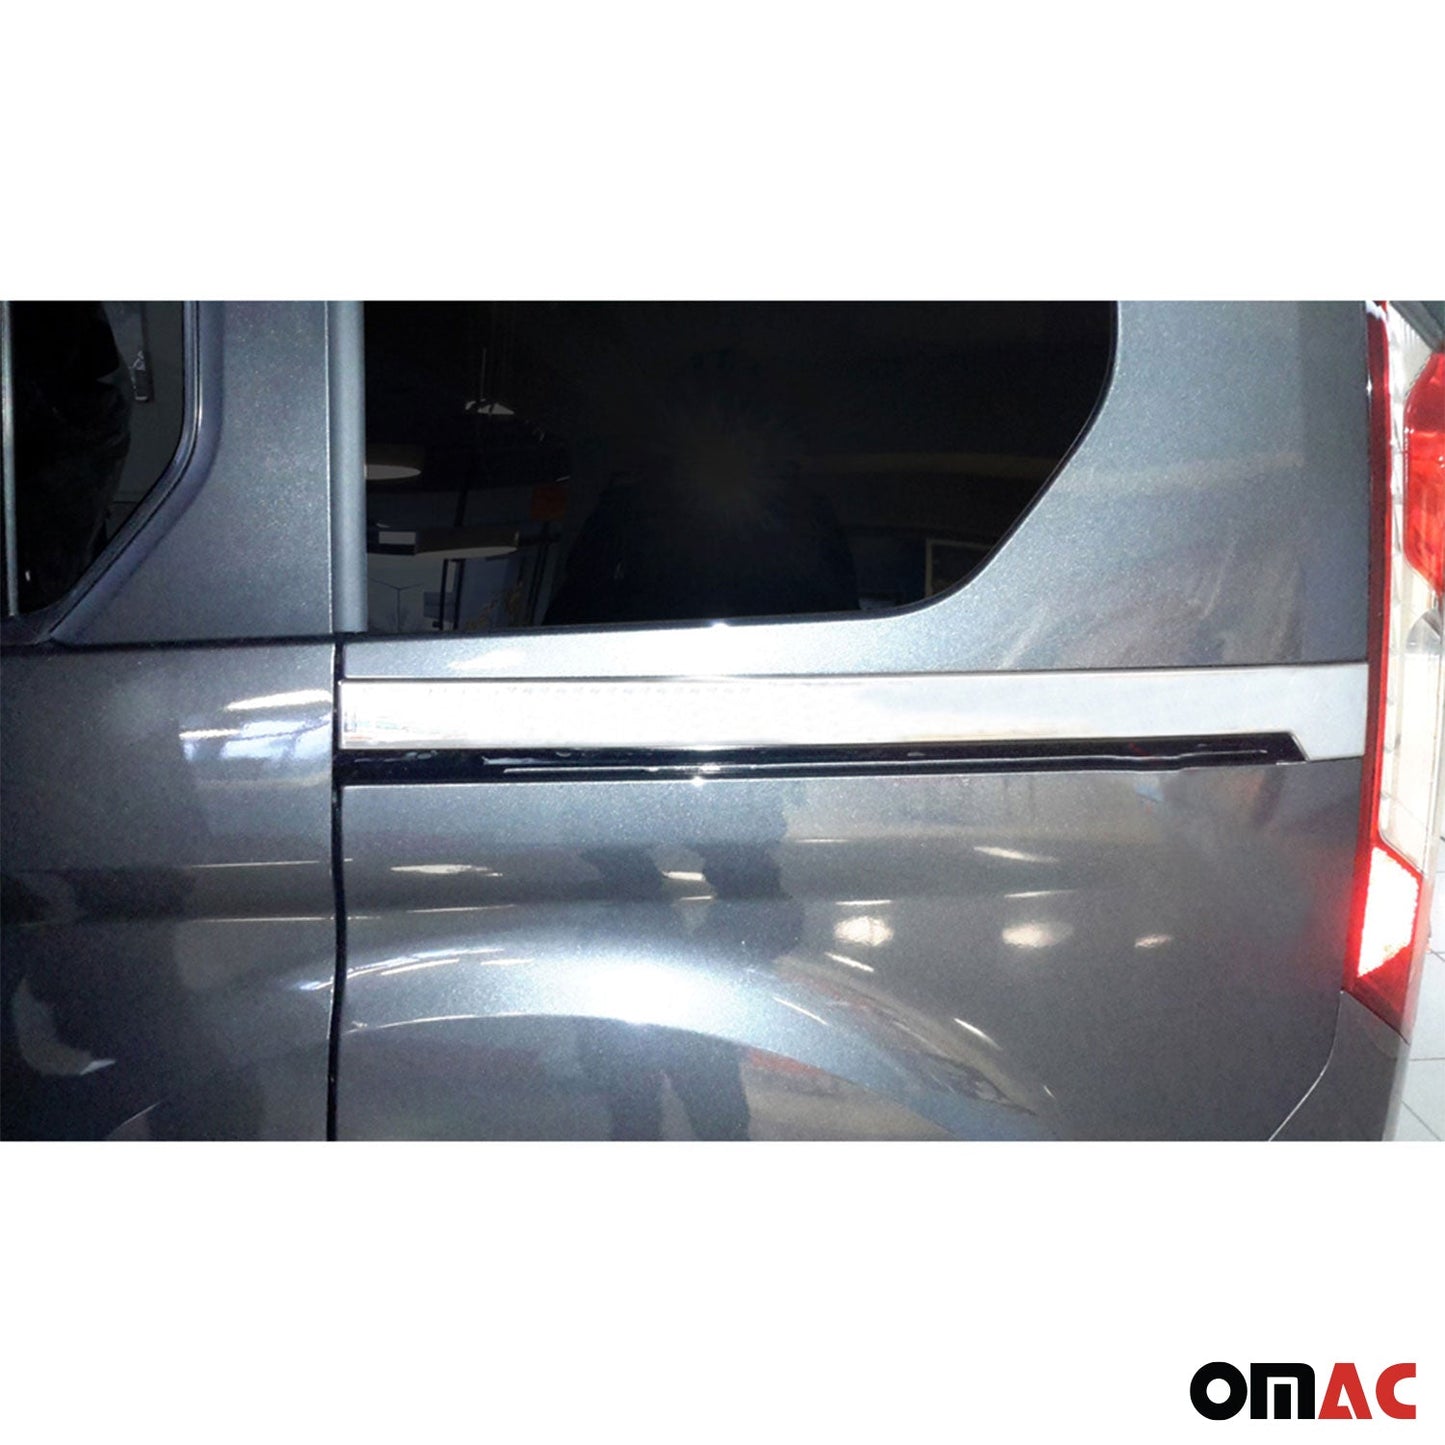 OMAC Side Door Molding Trim for Ford Transit Connect 2014-2019 L1 Steel Silver 2x 2627132